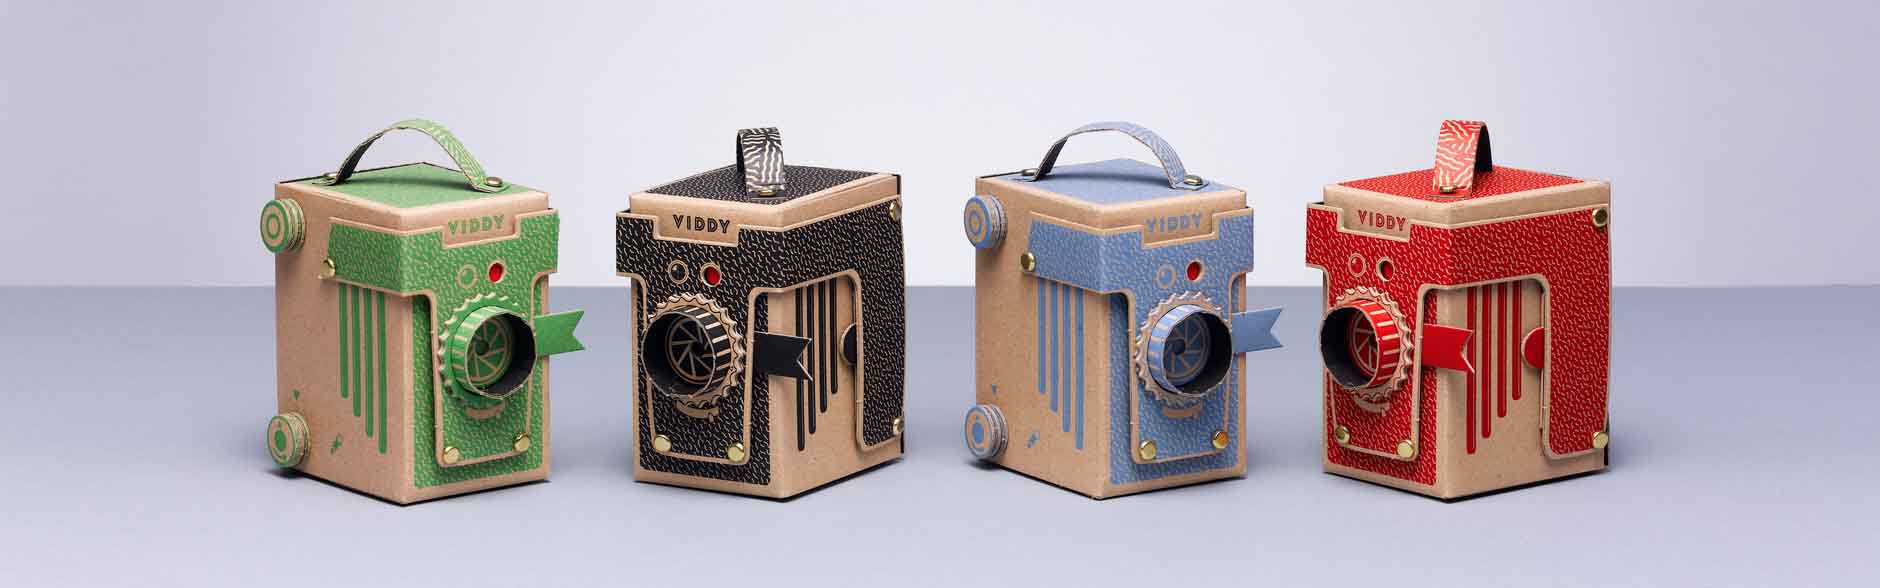 2014-holiday-gift-guide-Pinhole-Camers